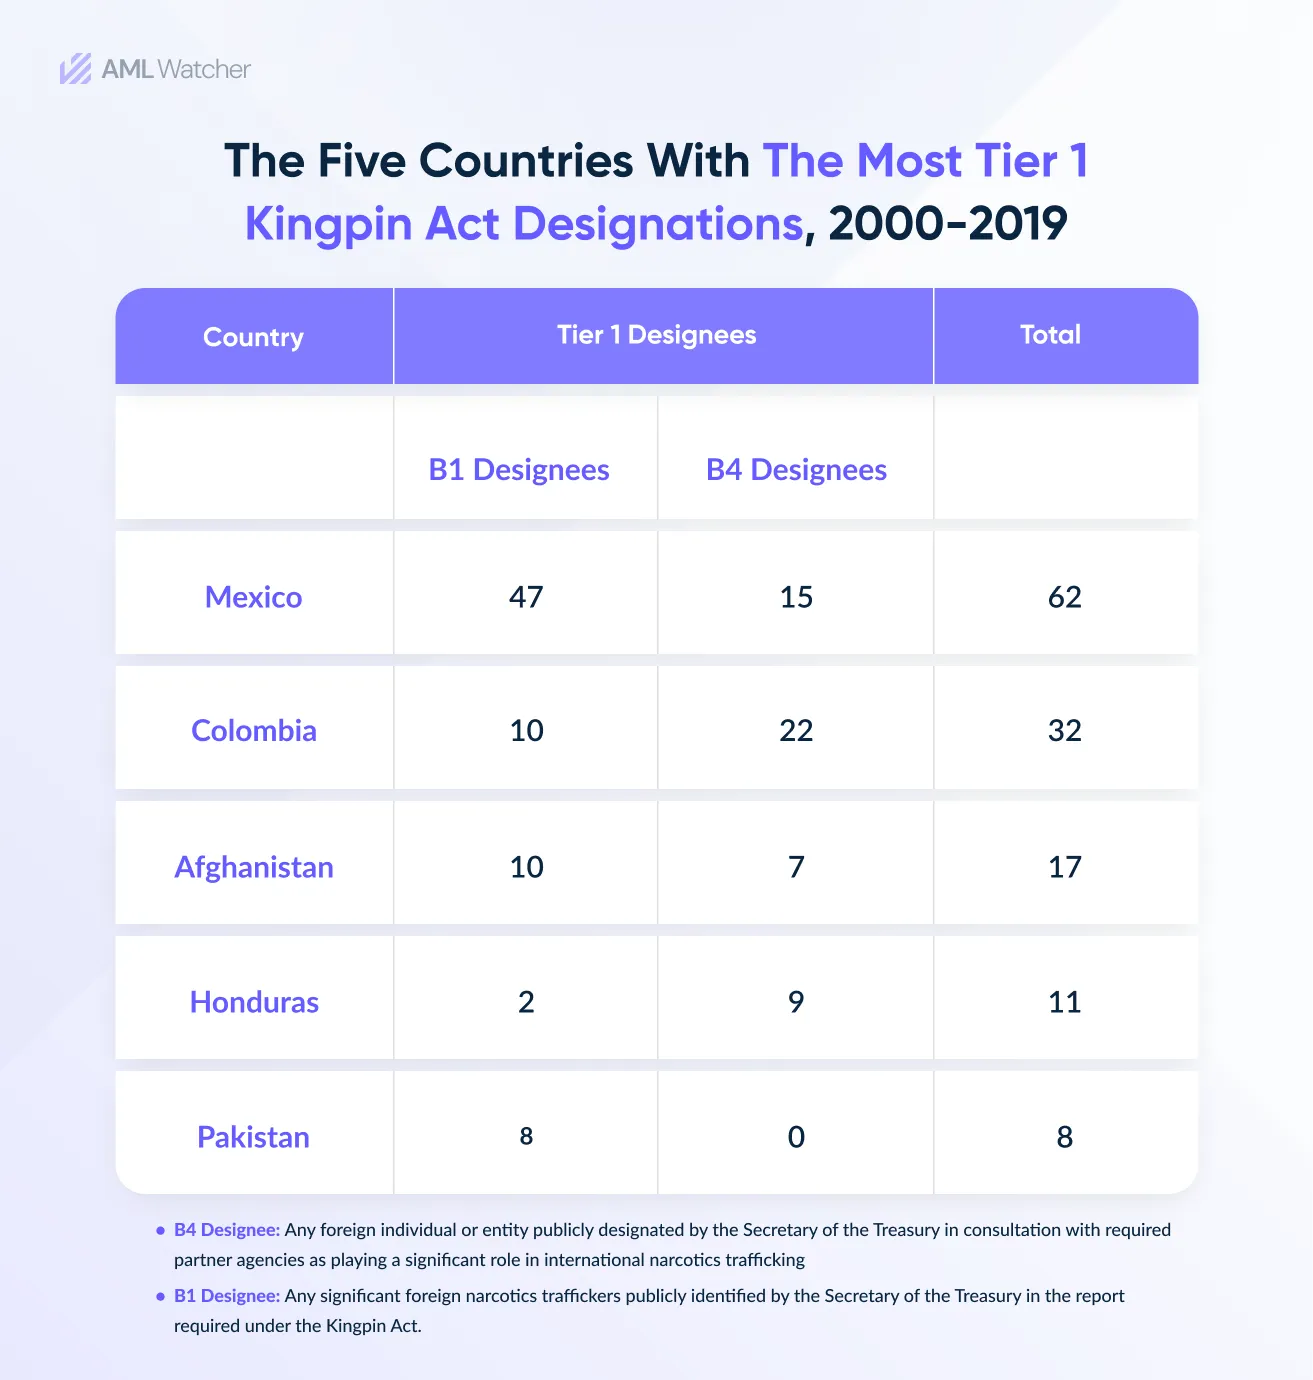 The infographic shows five countries with the most tier 1 kingpin designations under the act.  